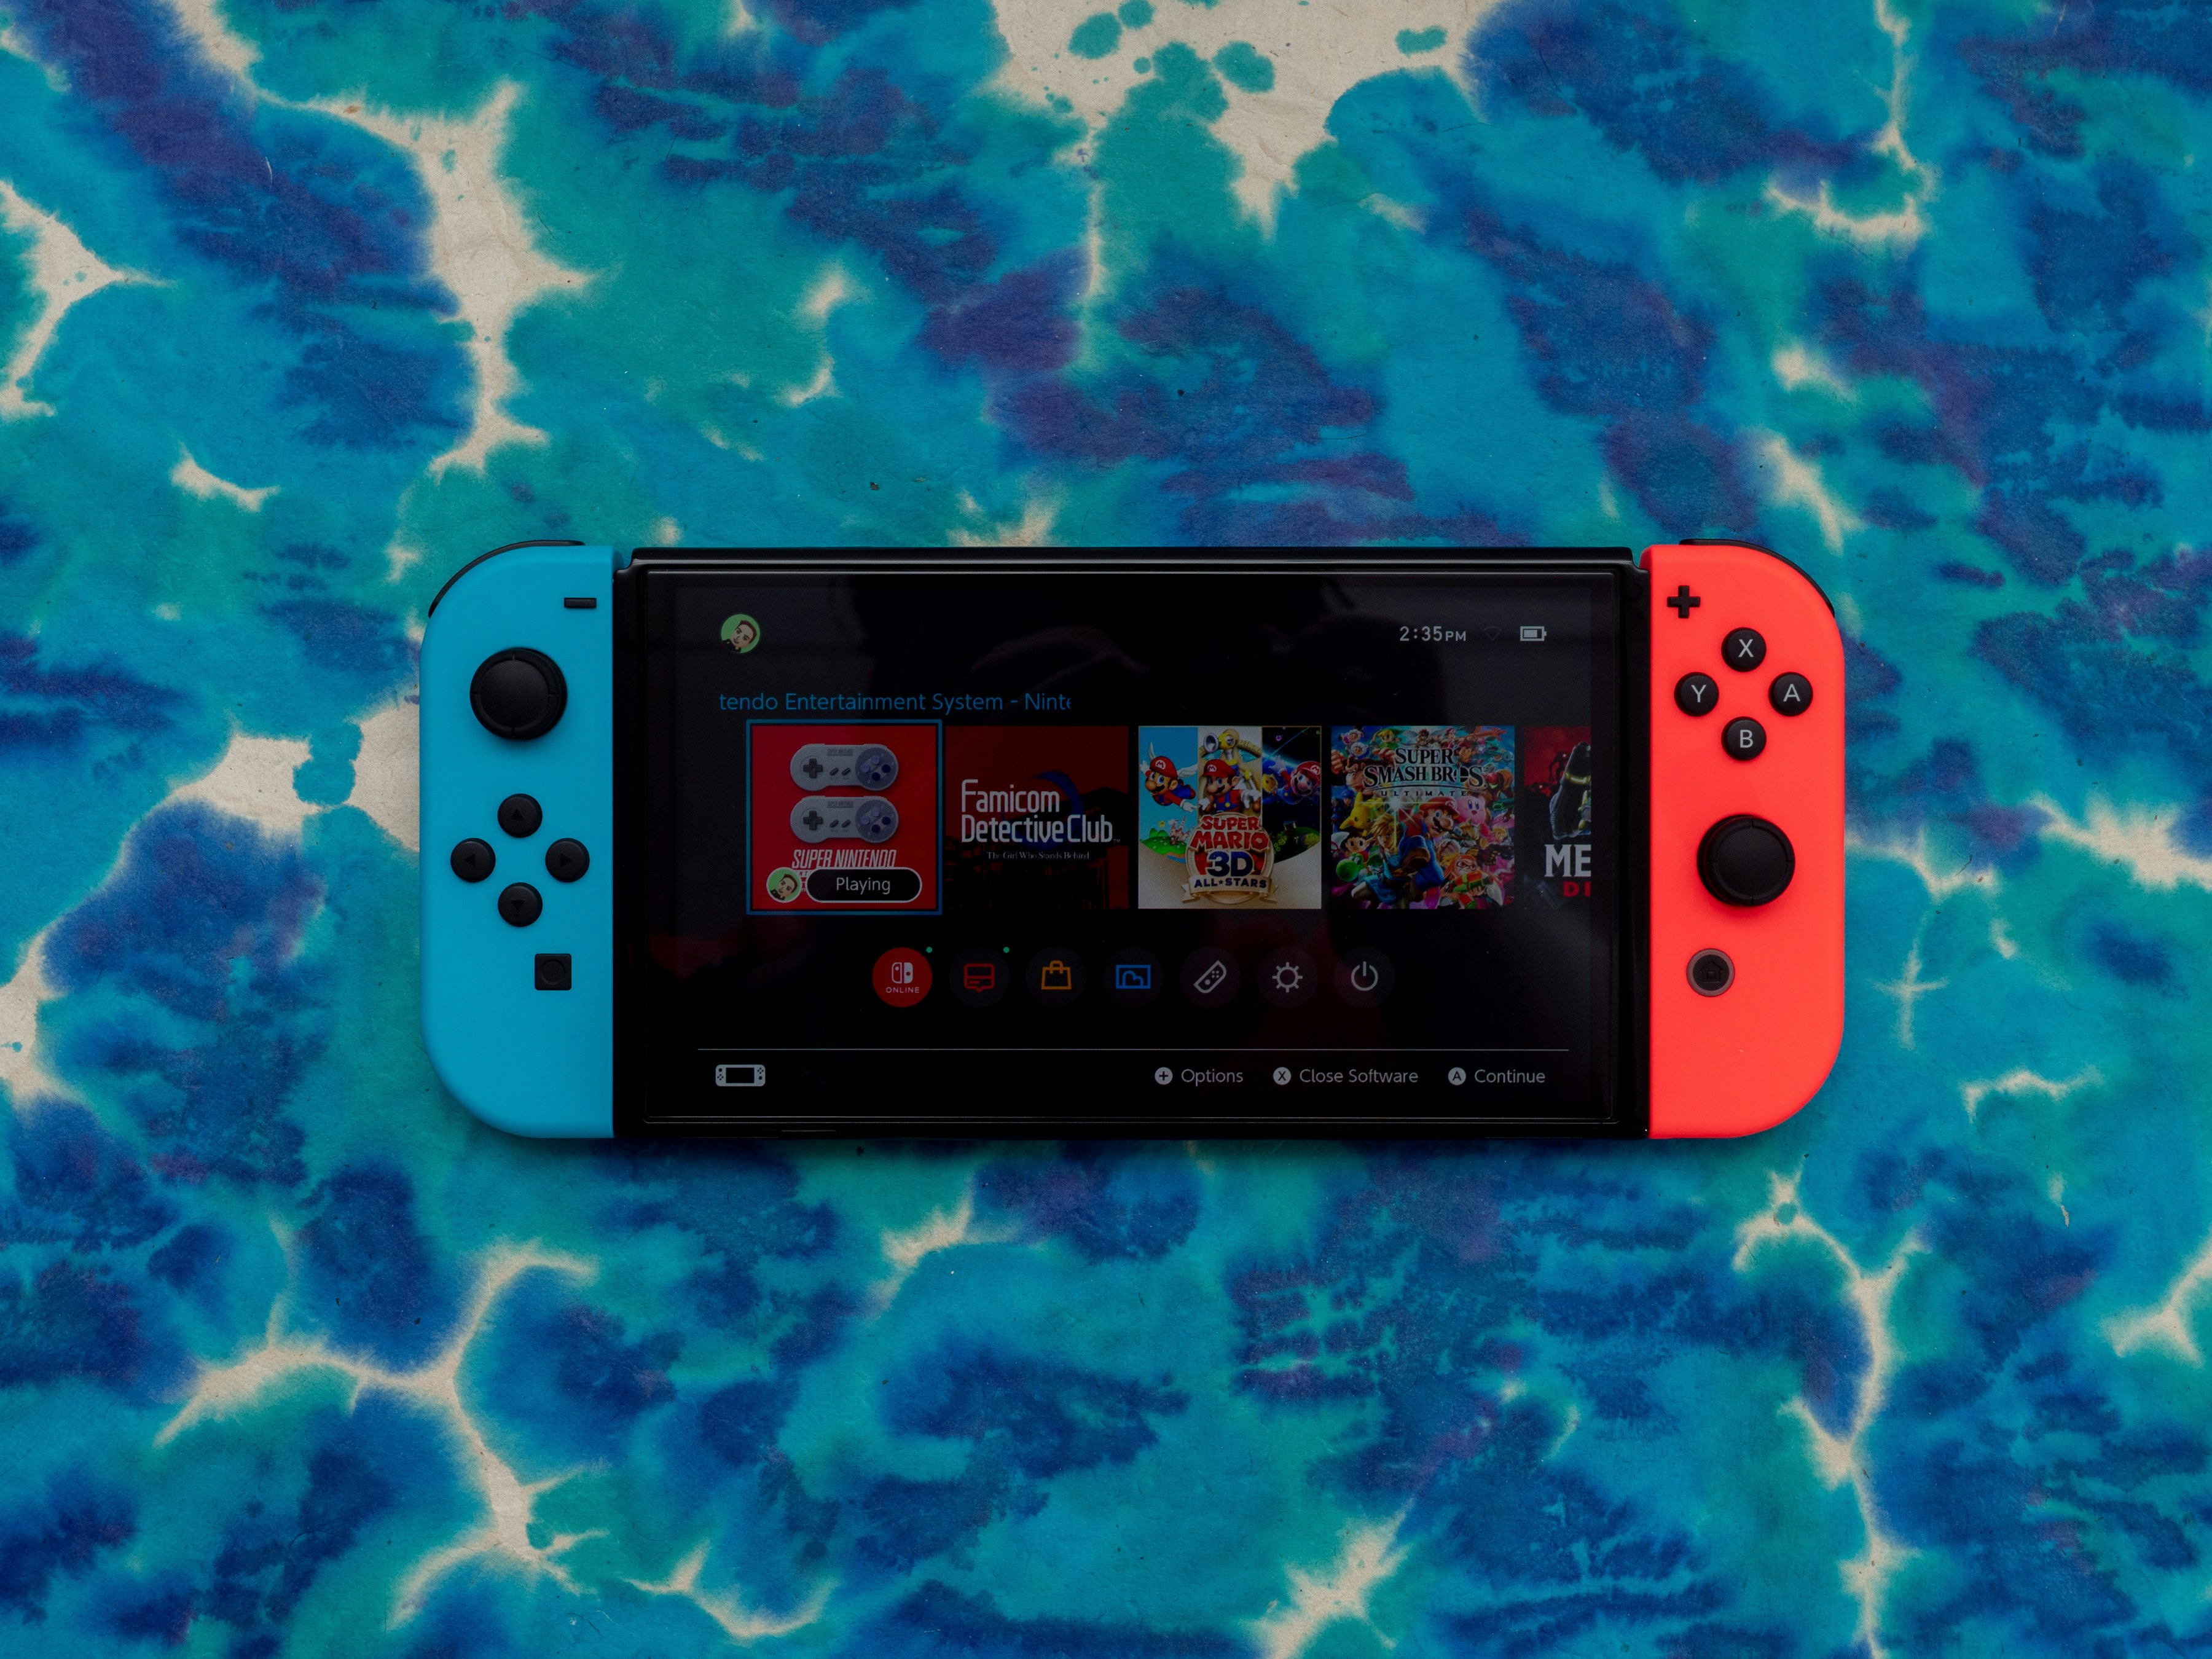 It Takes Two Nintendo Switch Review - Is It Worth It? 